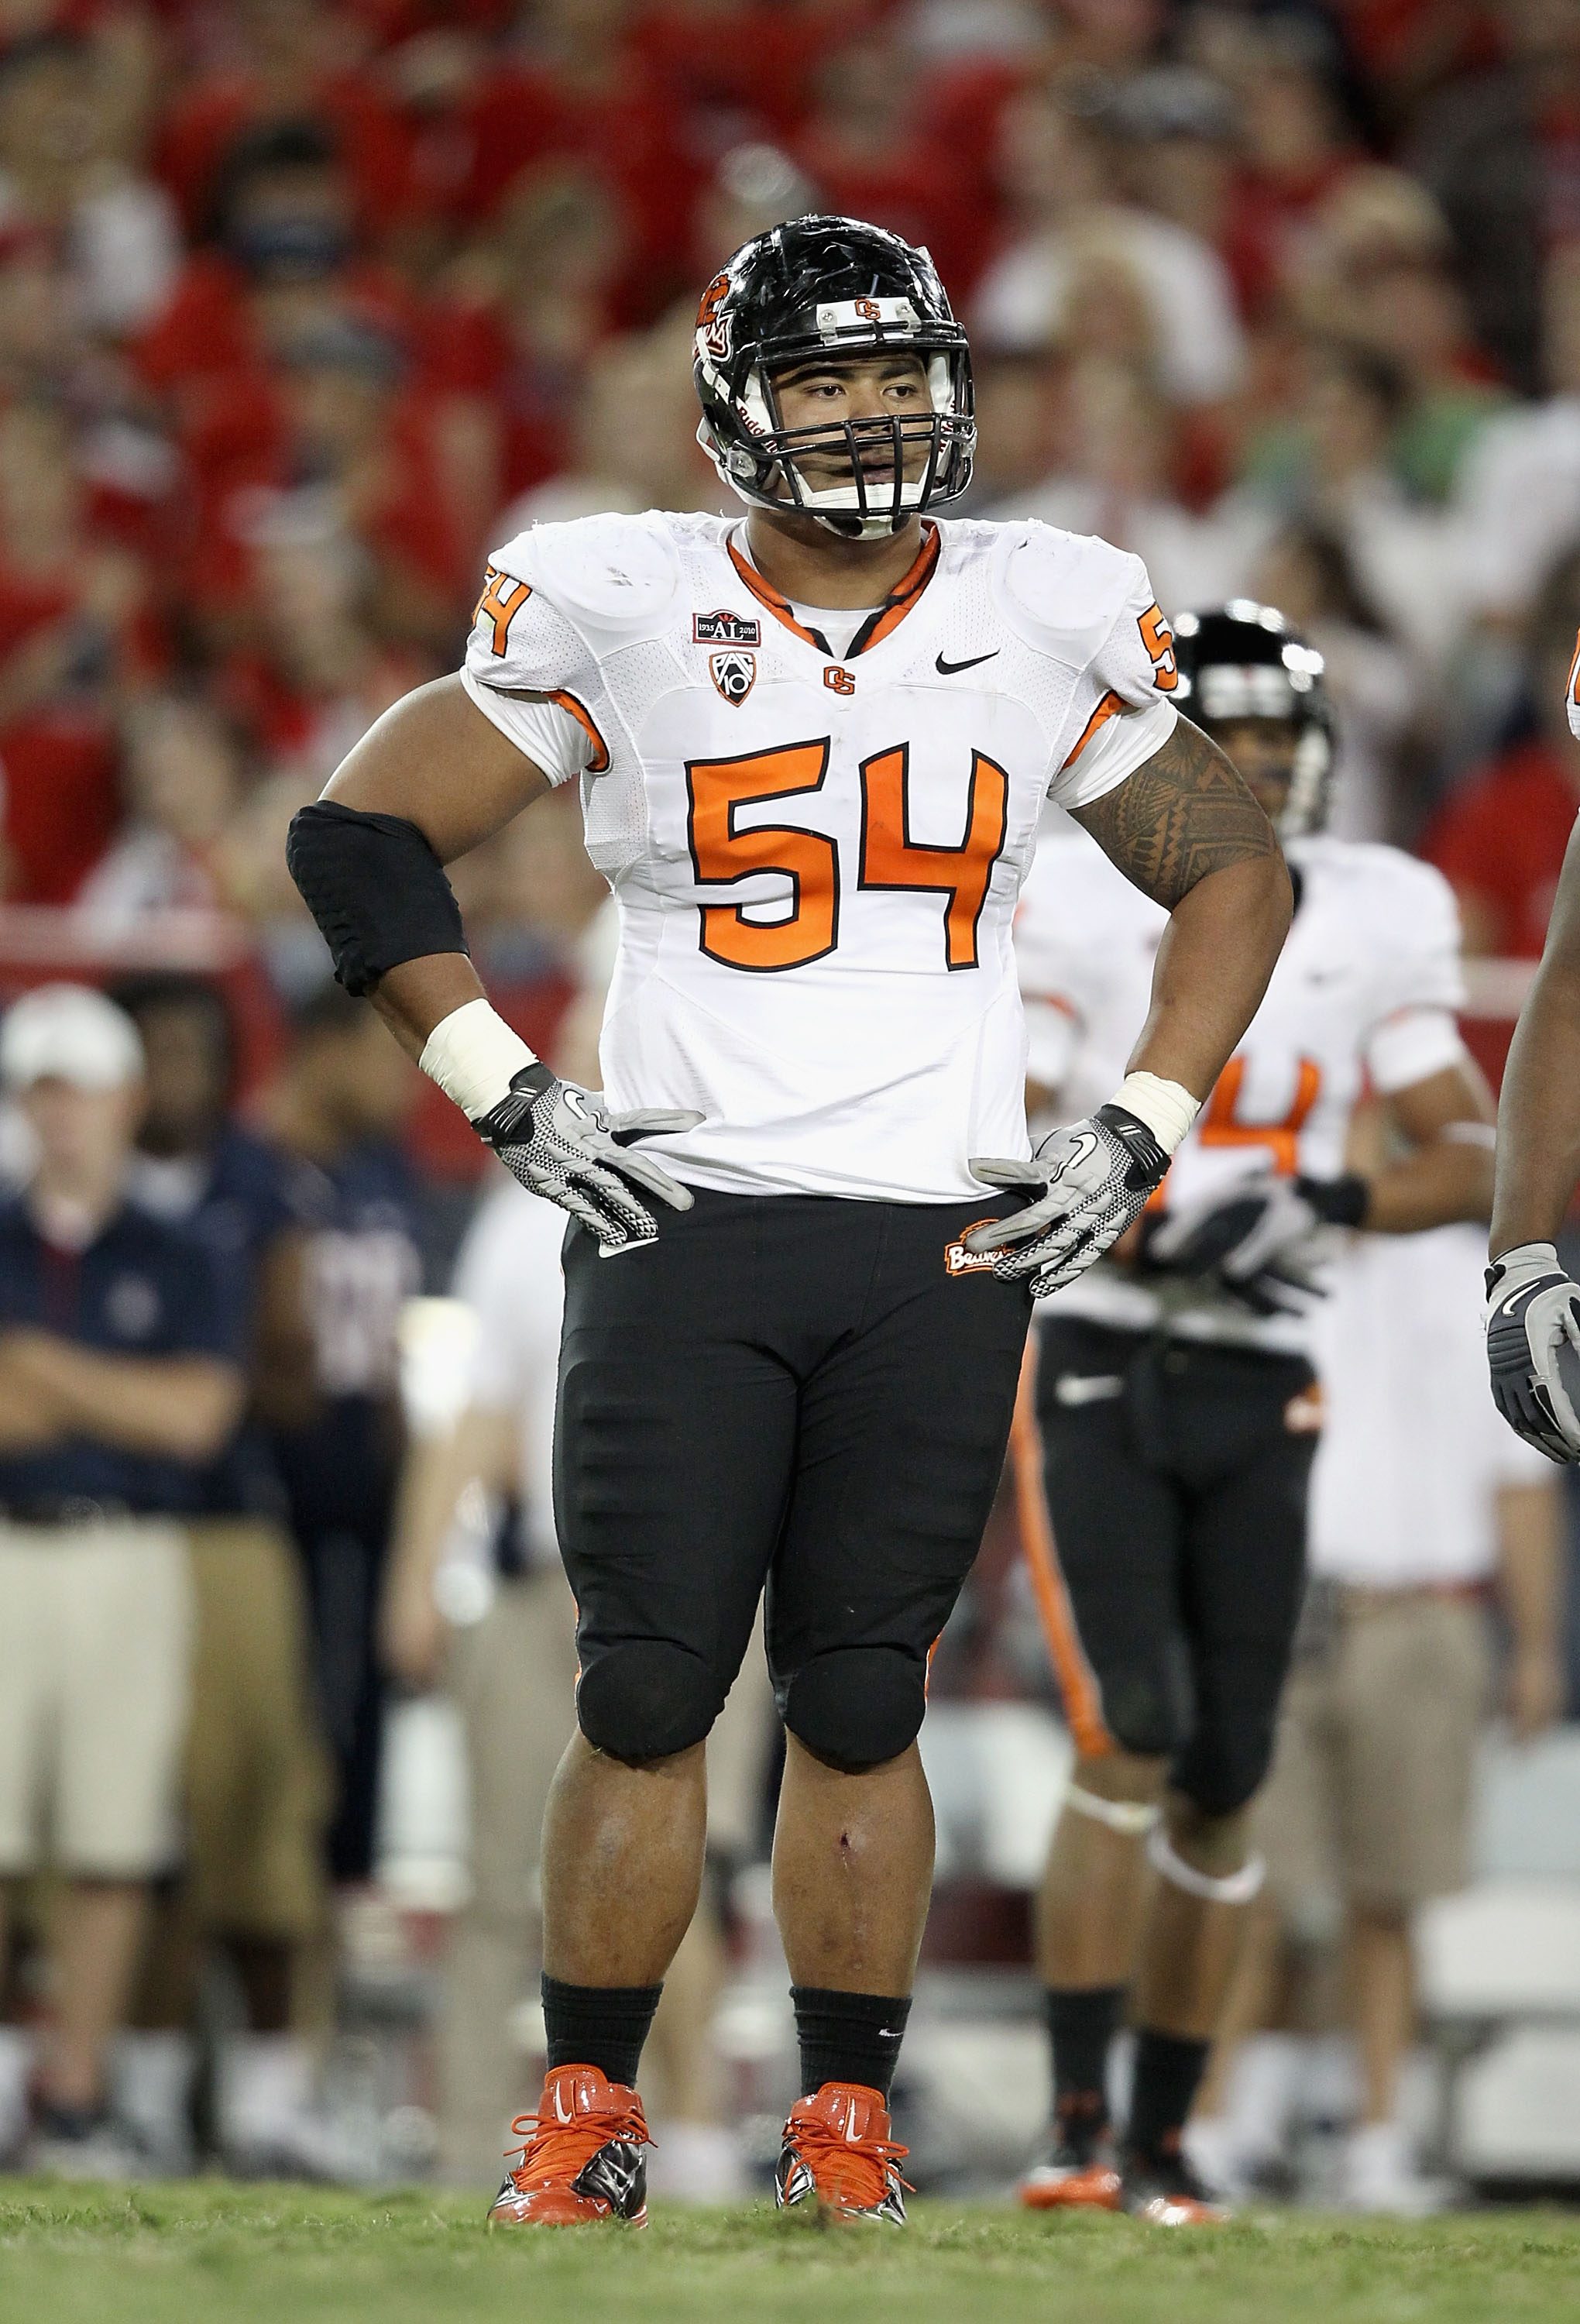 TUCSON, AZ - OCTOBER 09:  Defensive tackle Stephen Paea #54 of the Oregon State Beavers during the college football game against the Arizona Wildcats at Arizona Stadium on October 9, 2010 in Tucson, Arizona.  The Beavers defeated the Wildcats 29-27.  (Pho